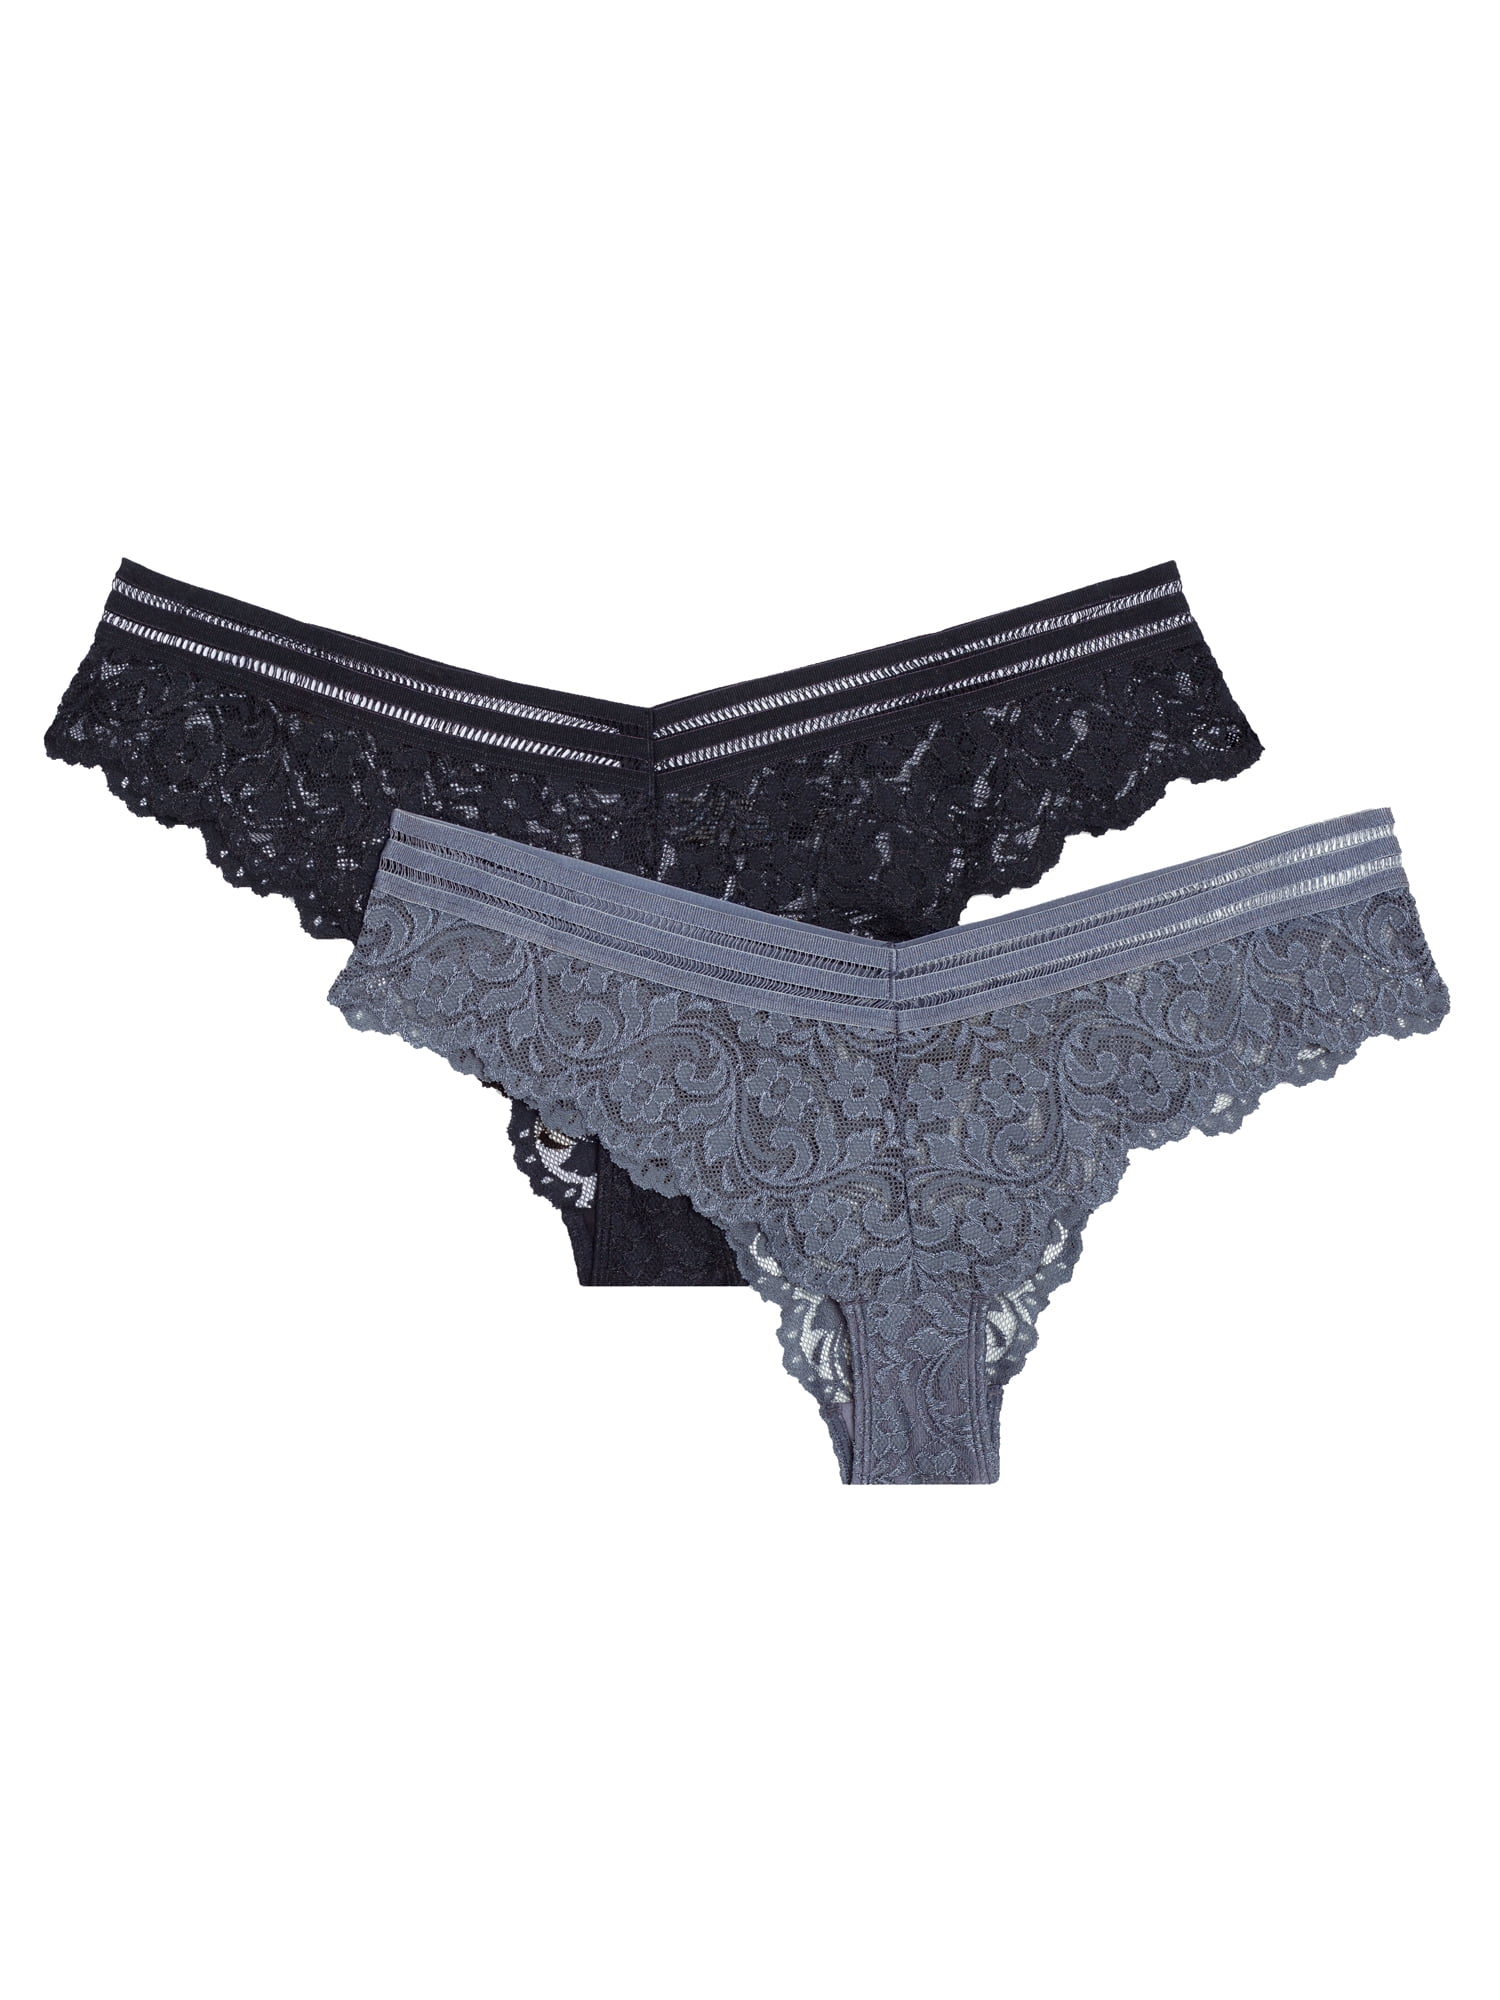 Pack of 2 pairs of Sexy Fashion cotton lace bikini knickers in black and  white